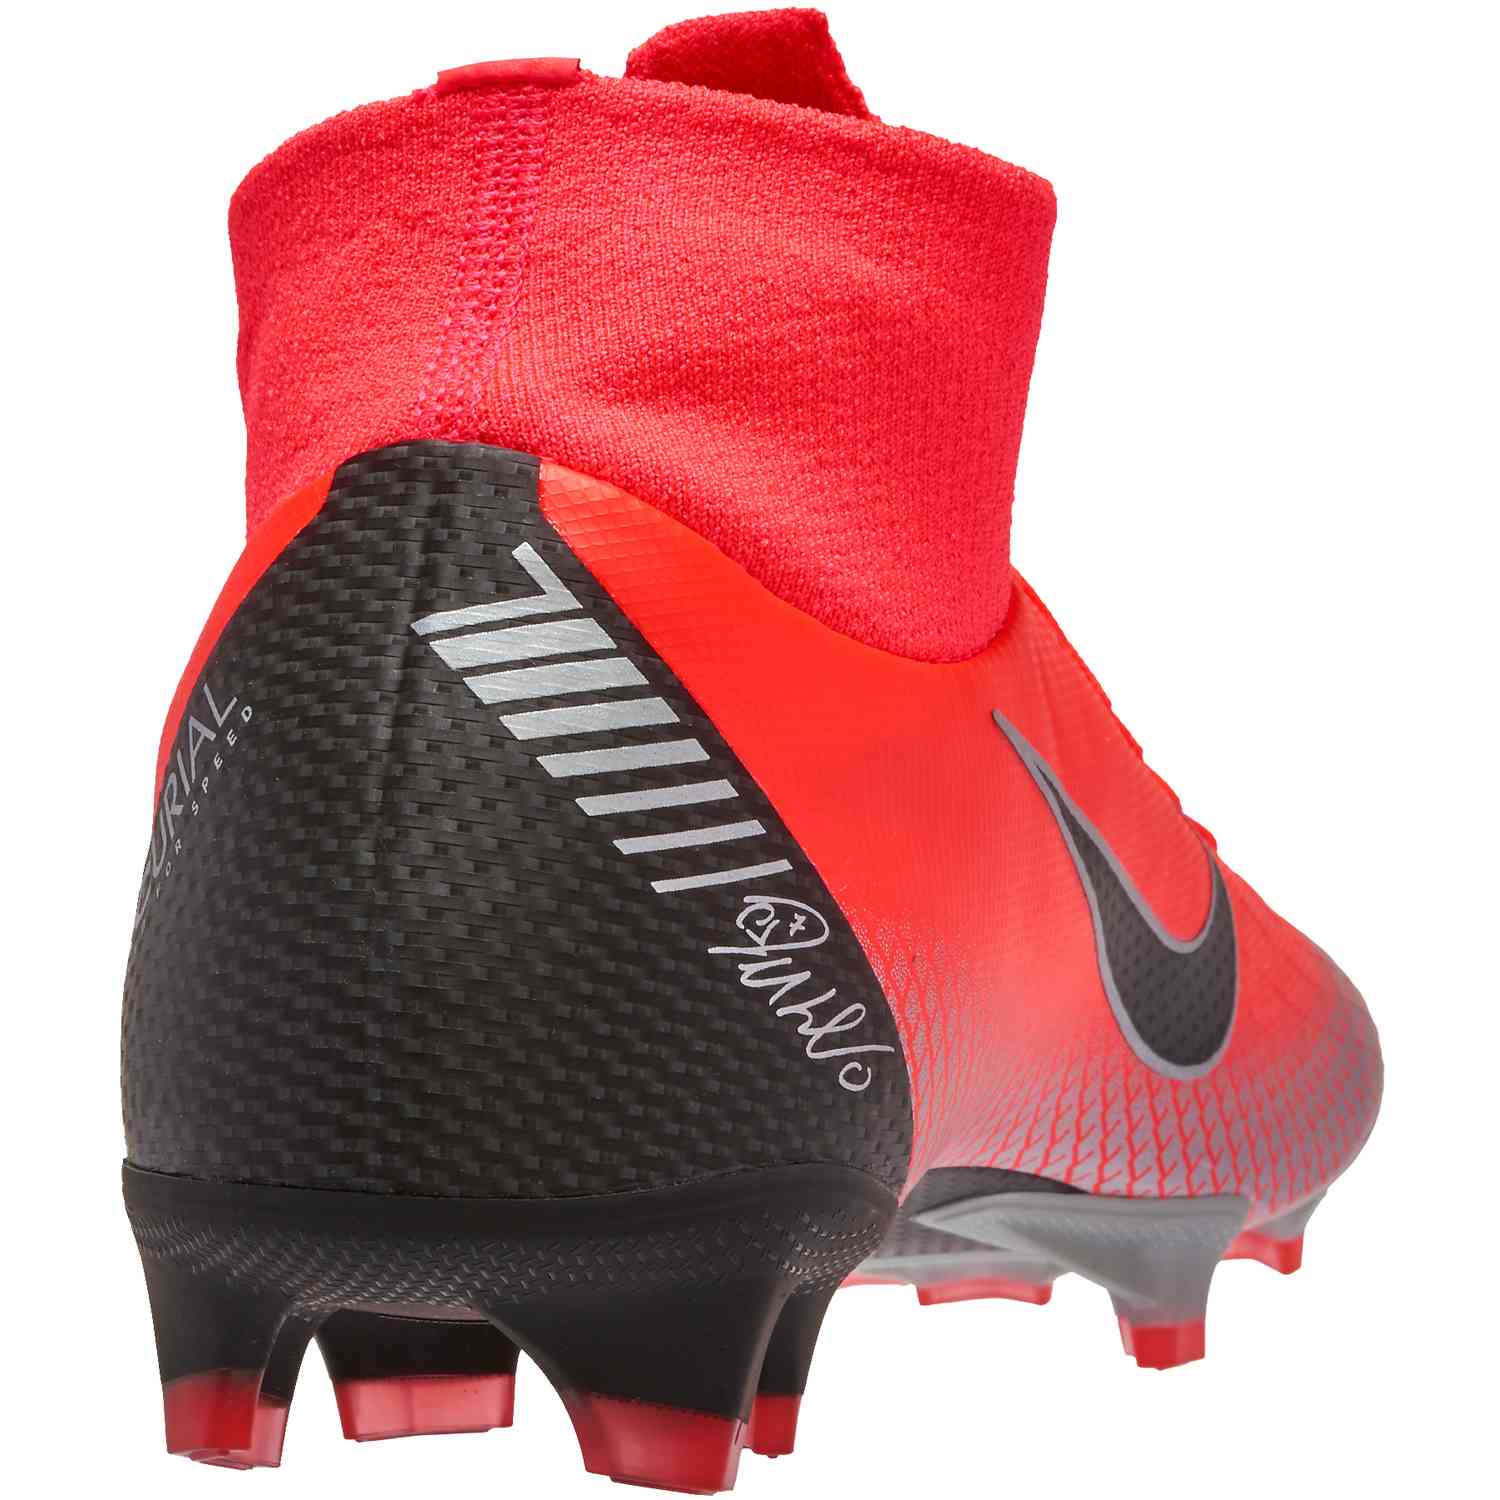 mercurial superfly 6 pro cr7 fg